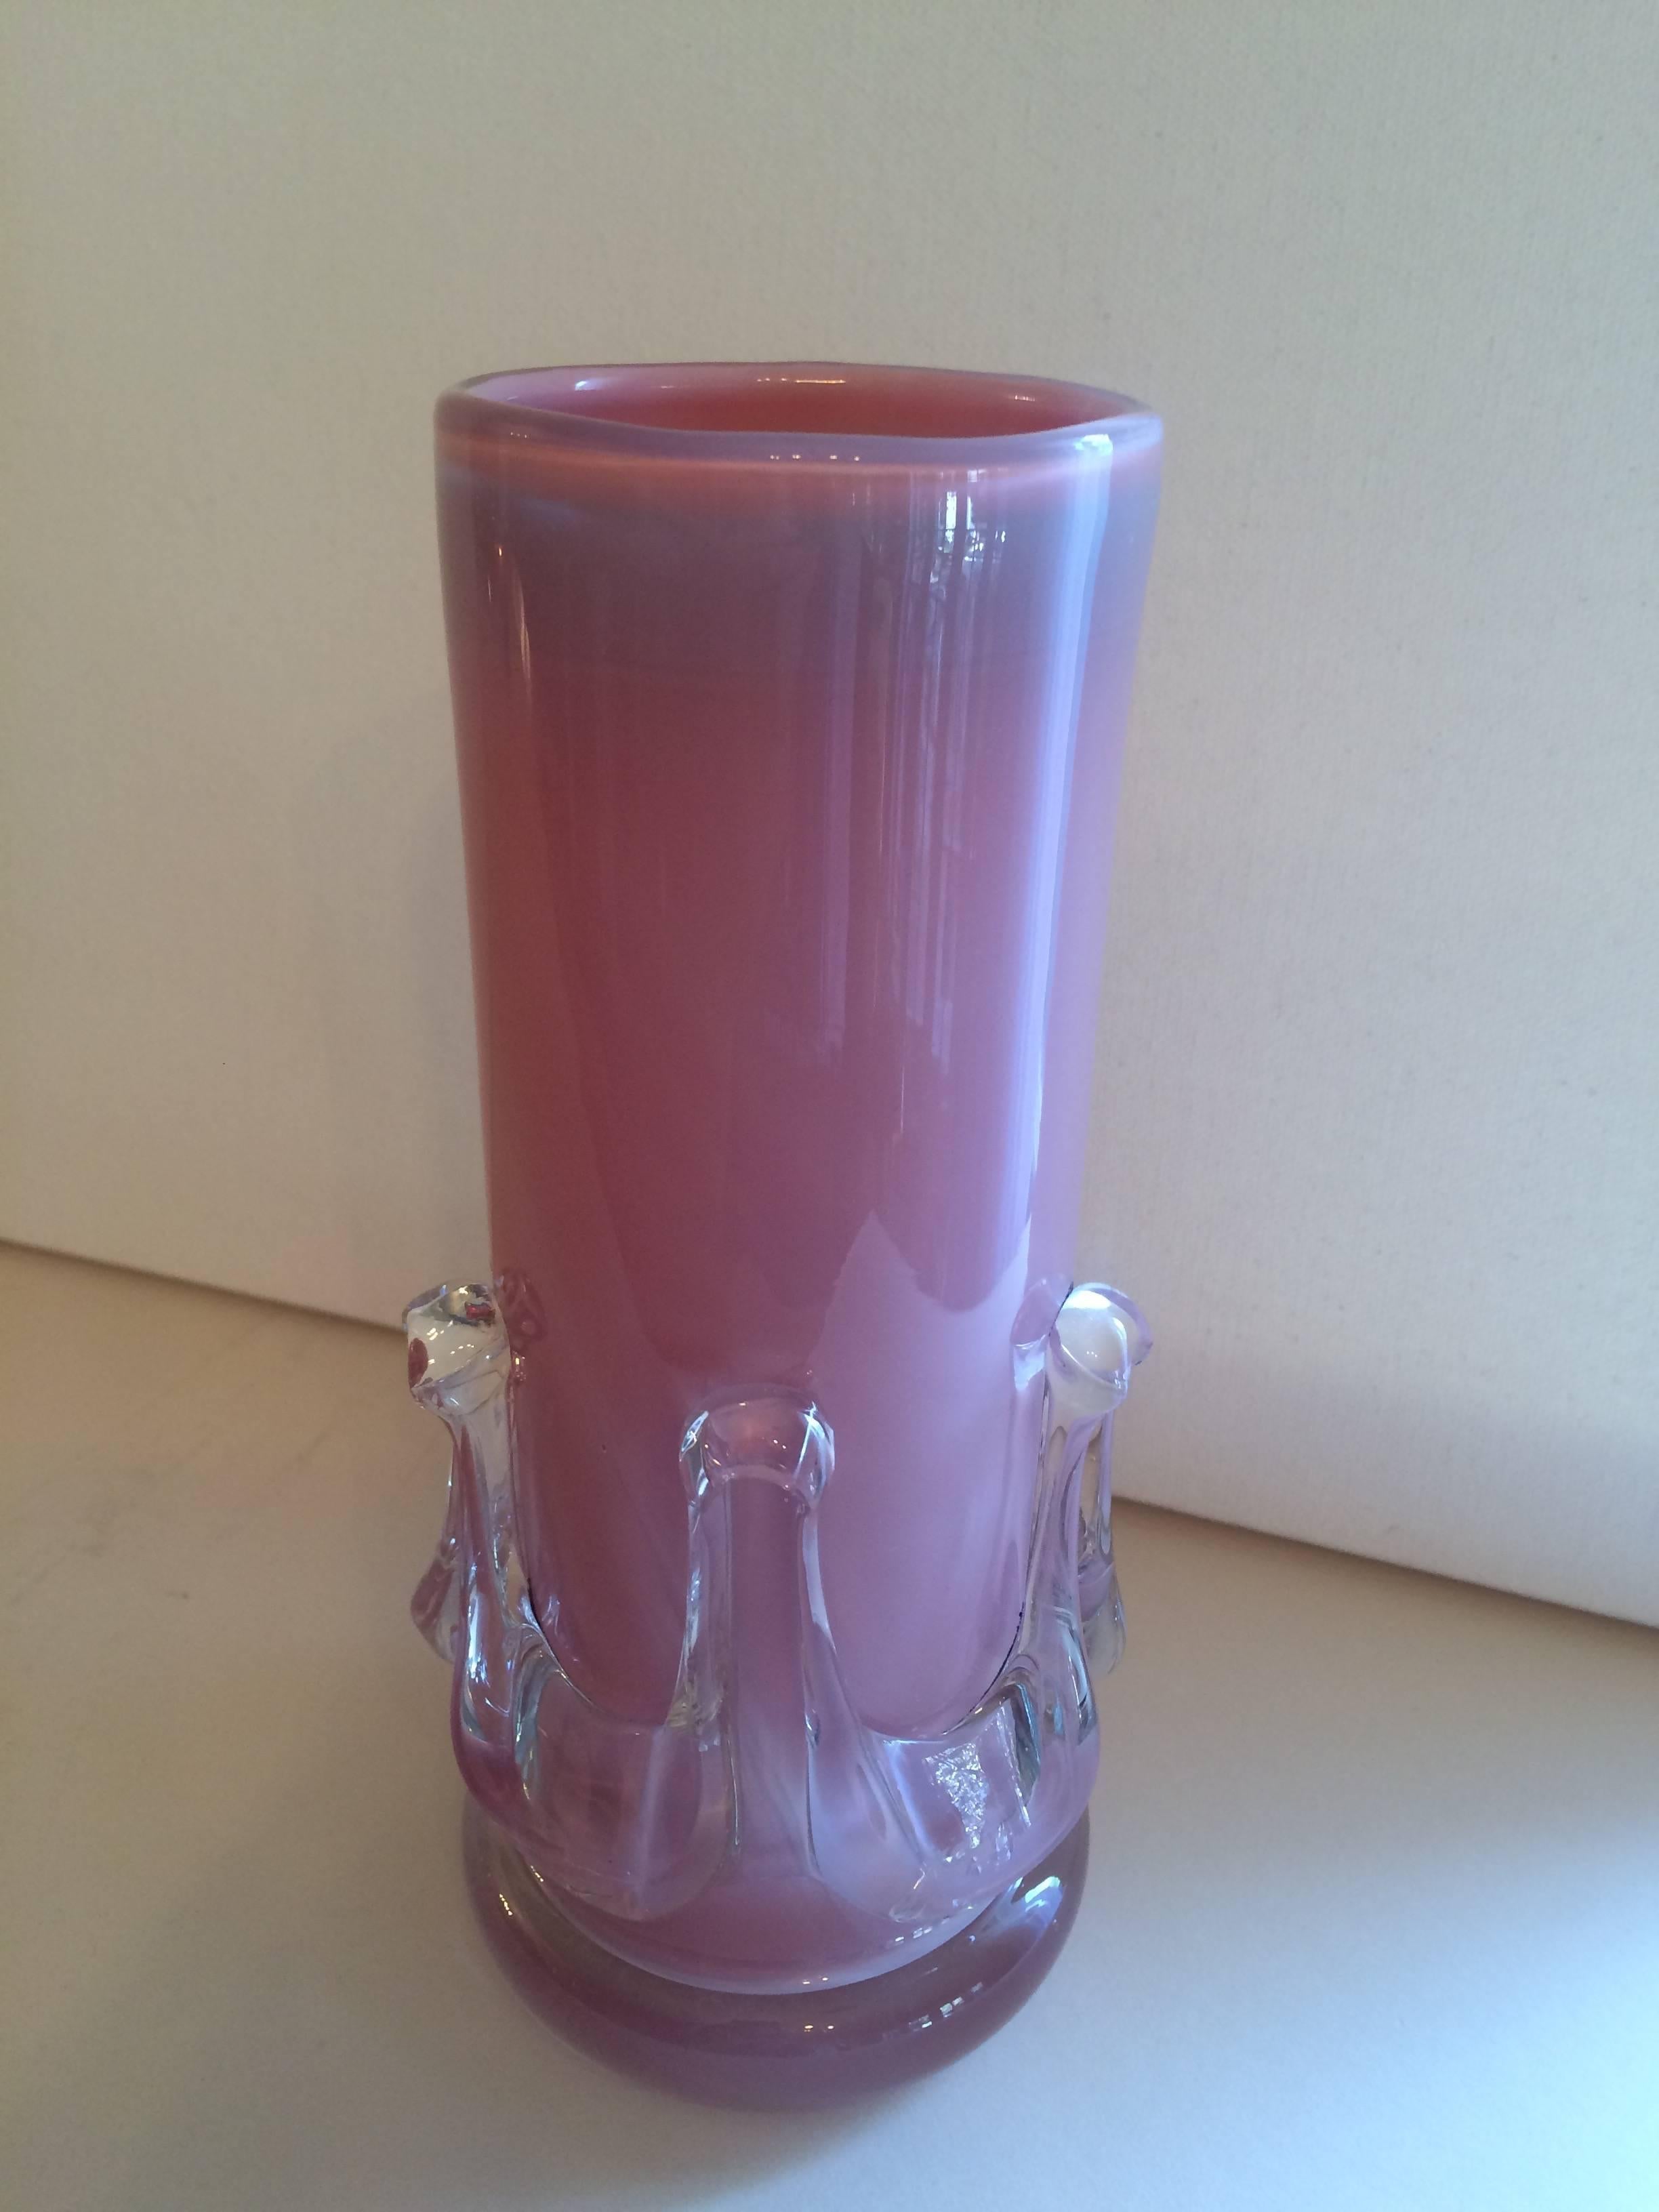 Mauve/pink bud vase perfect for a desk, dressing table or nightstand.

Full or empty a lovely statement.